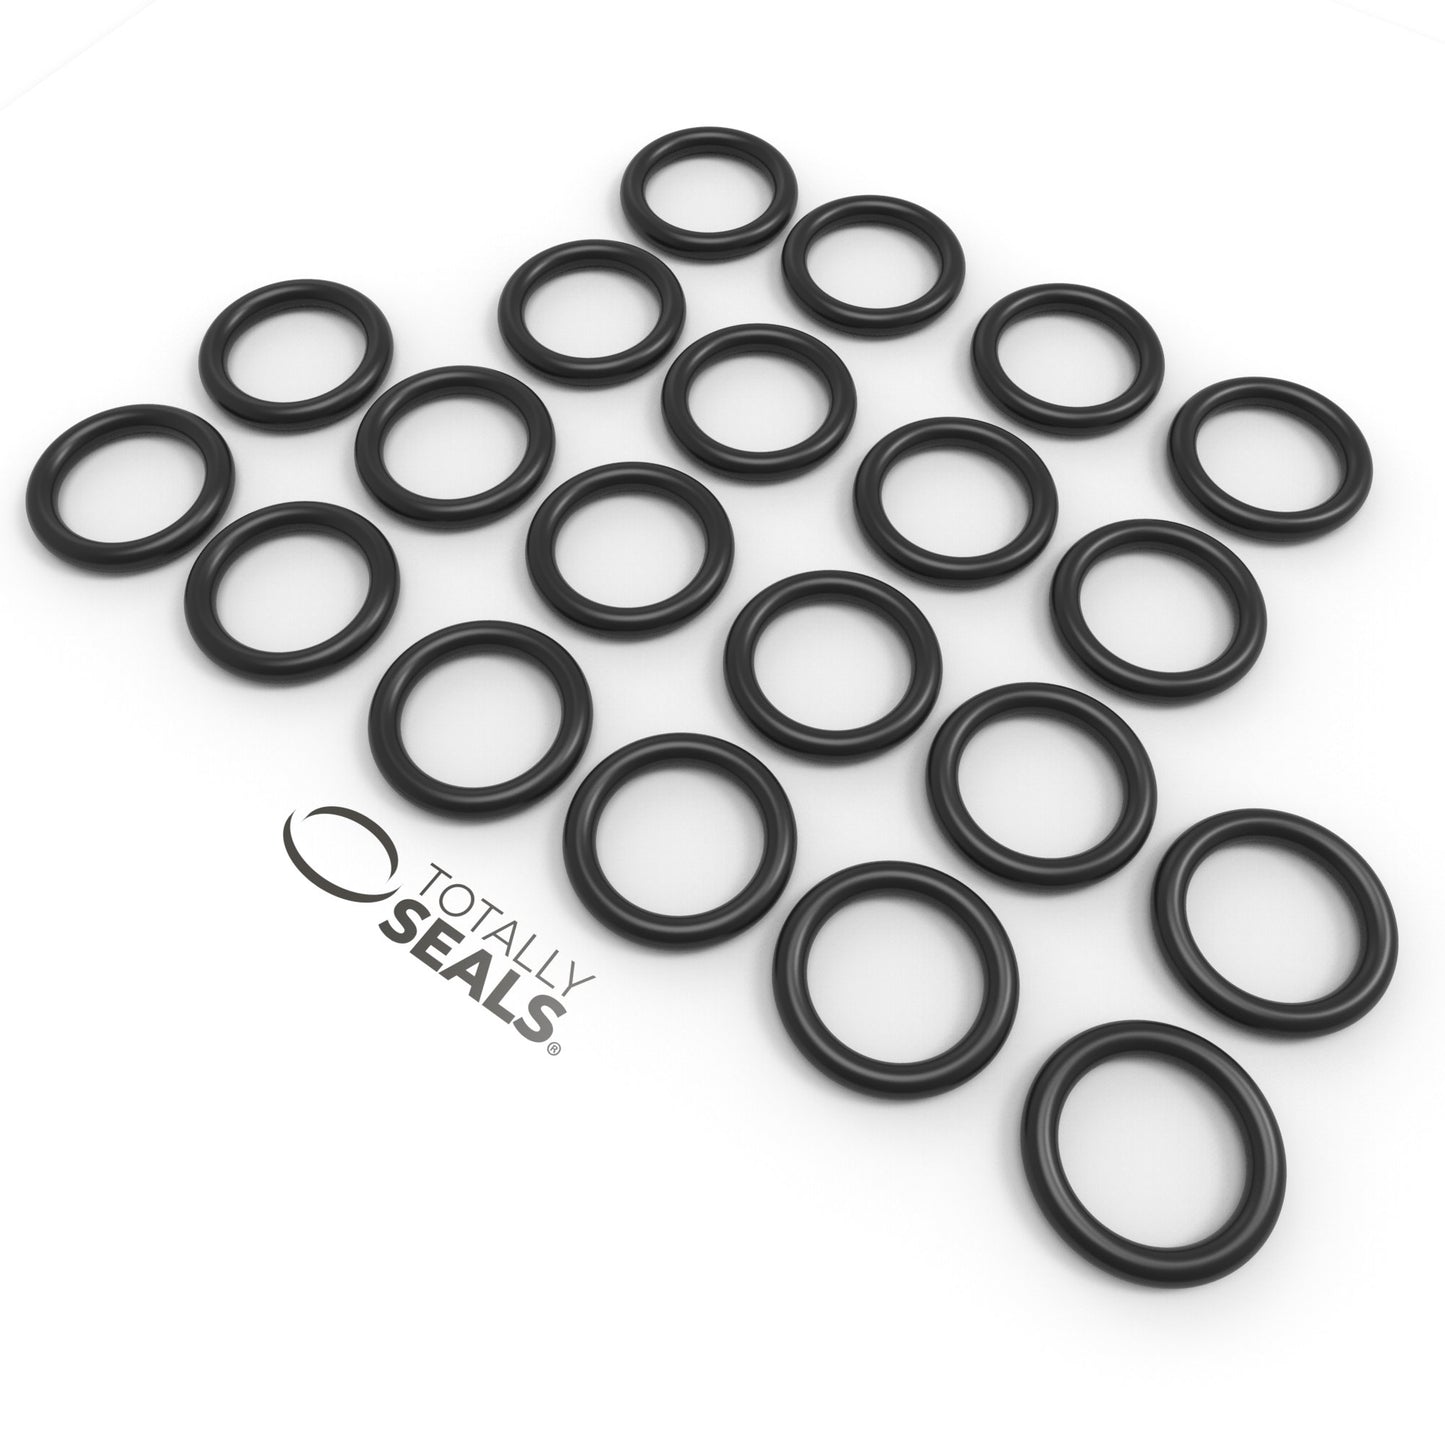 1-5/16" x 1/8" (BS219) Imperial Nitrile O-Rings - Totally Seals®